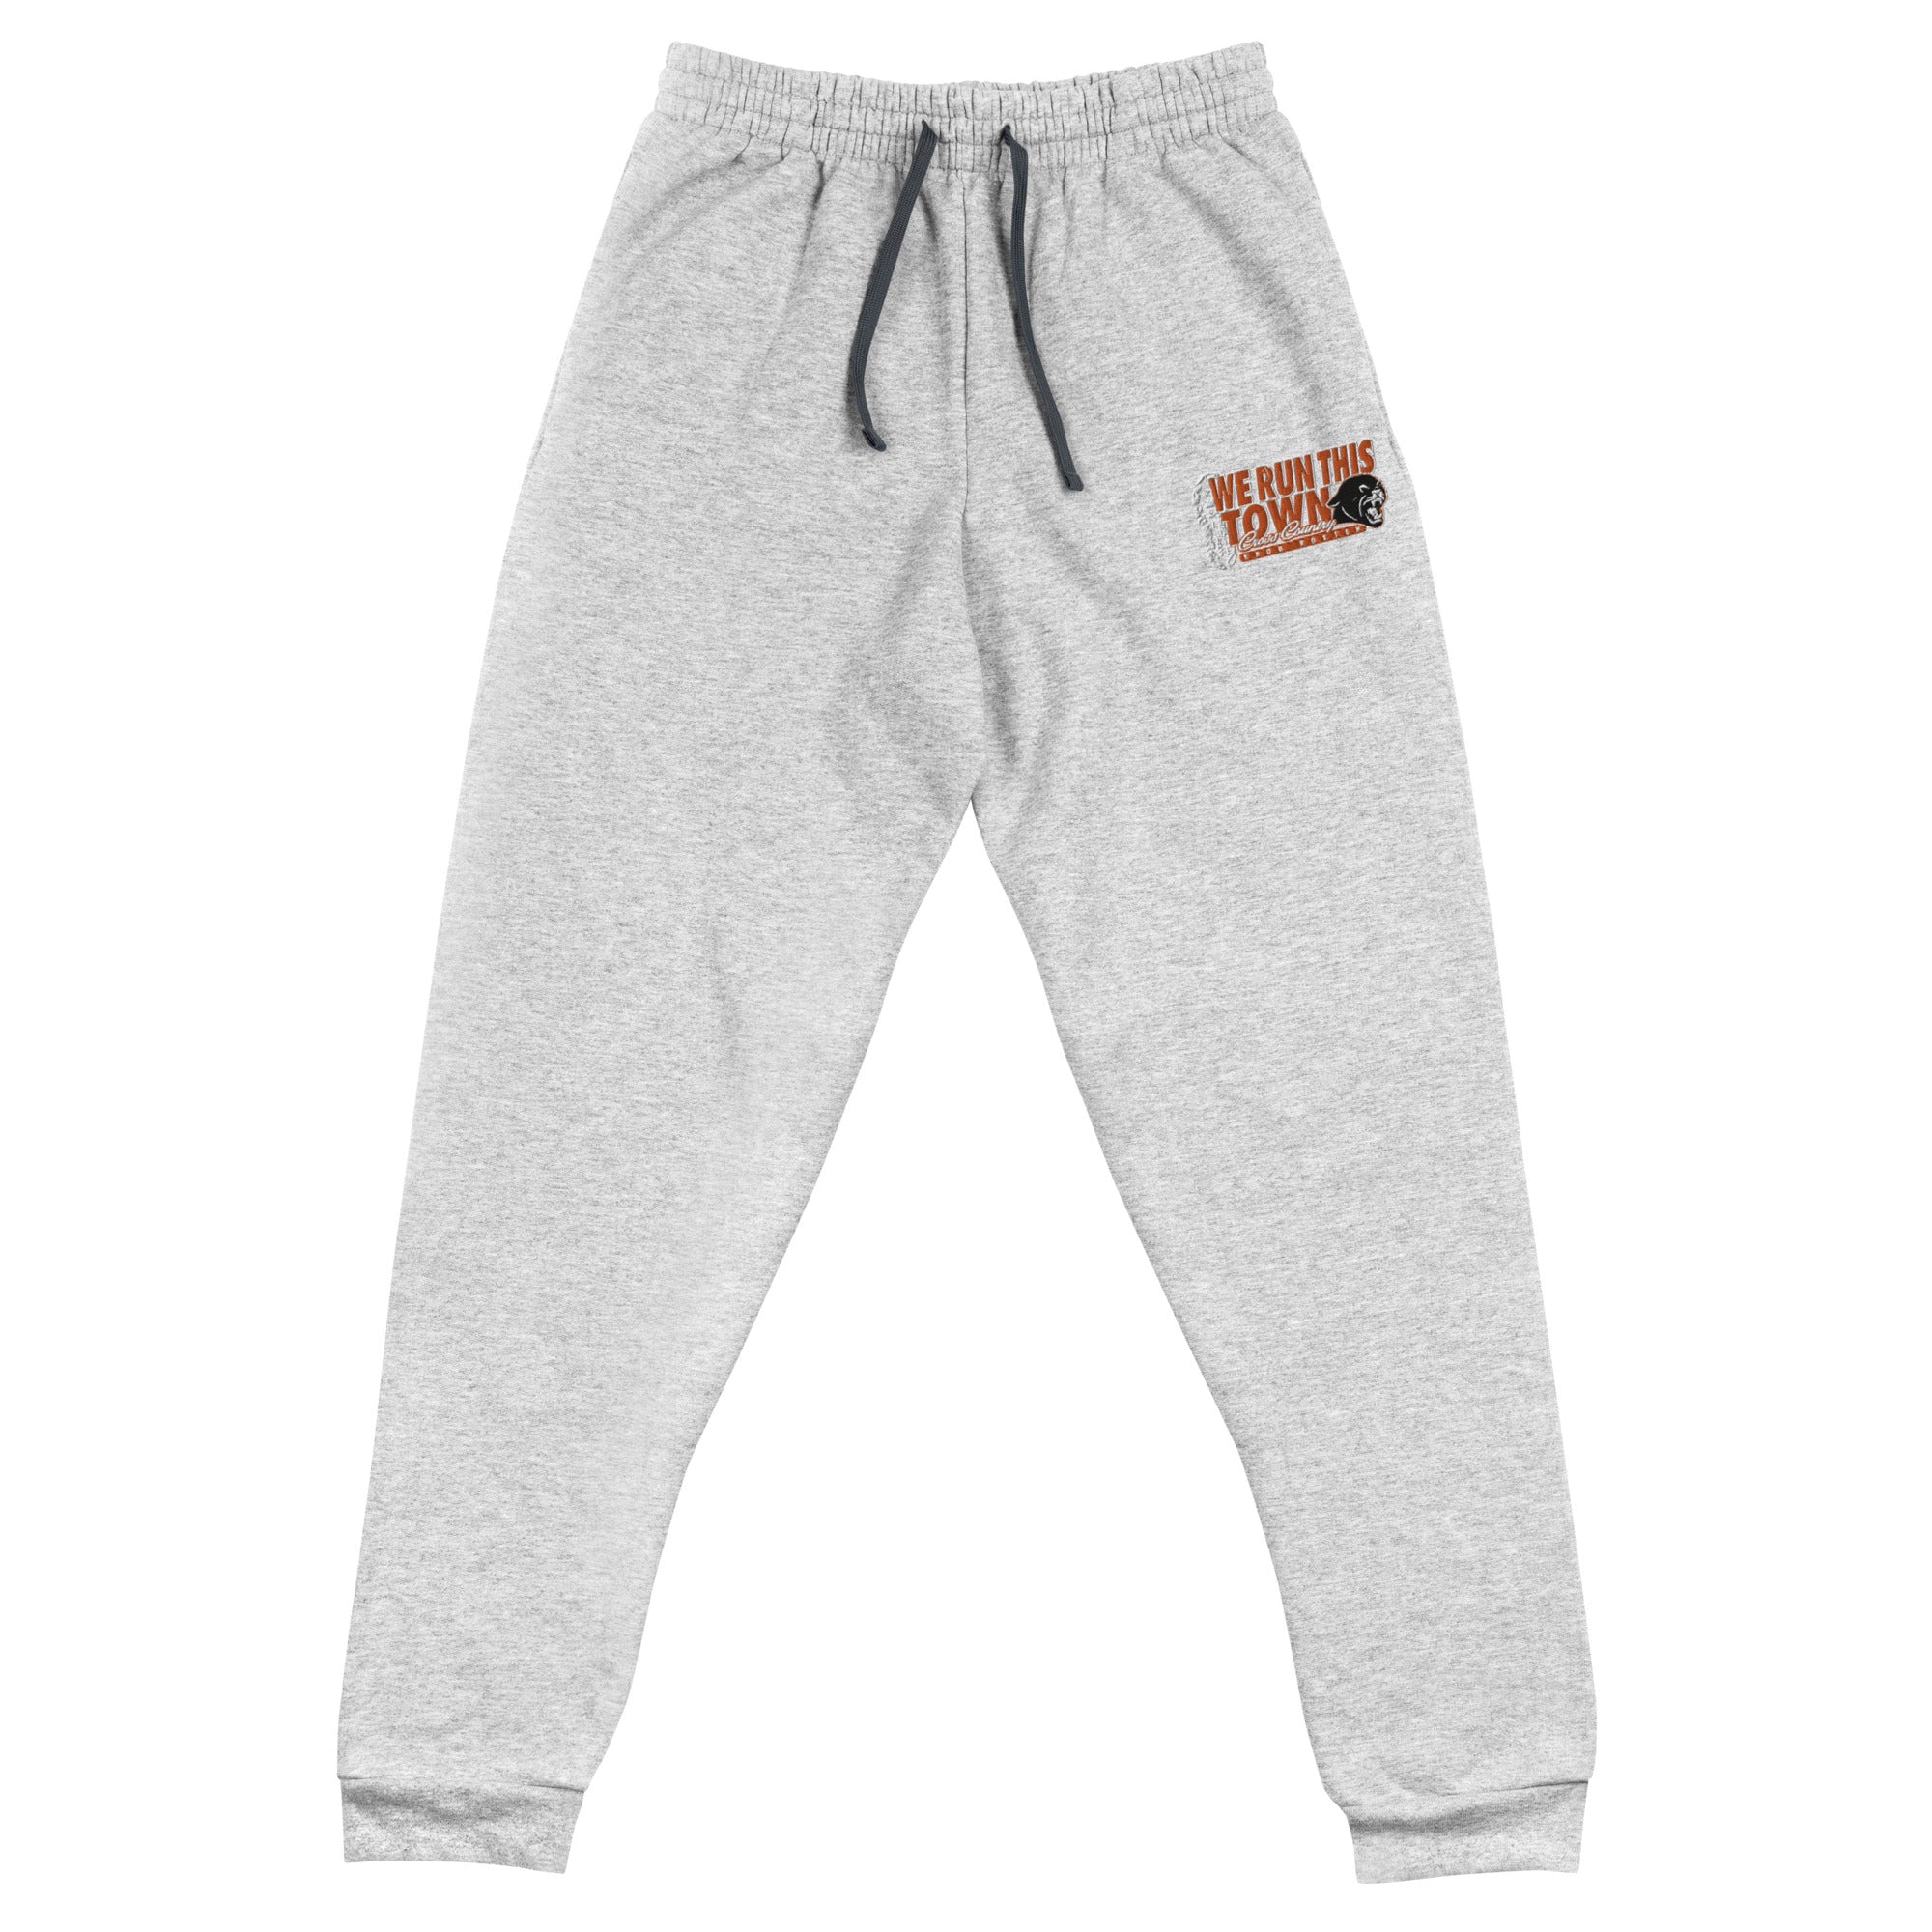 Knob Noster Cross Country Unisex Joggers